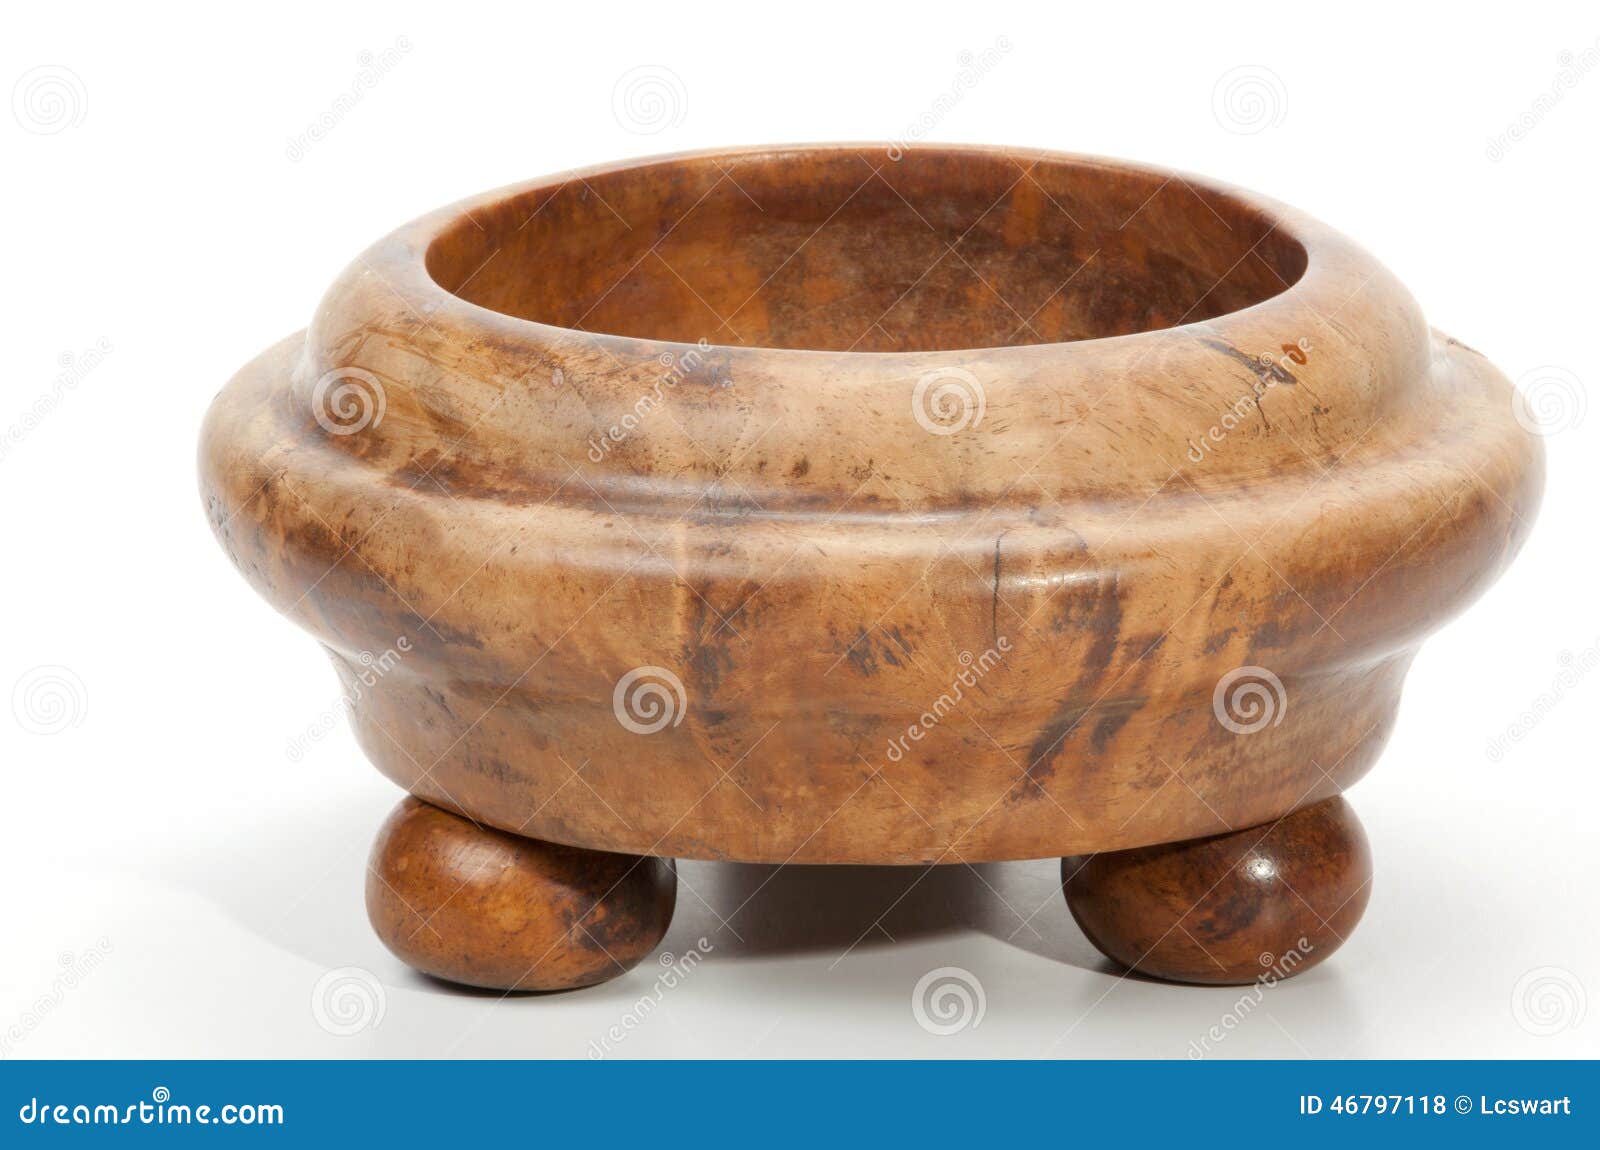 Turned Wooden Decorative Bowl With Ball-Shaped Legs Stock Photo 